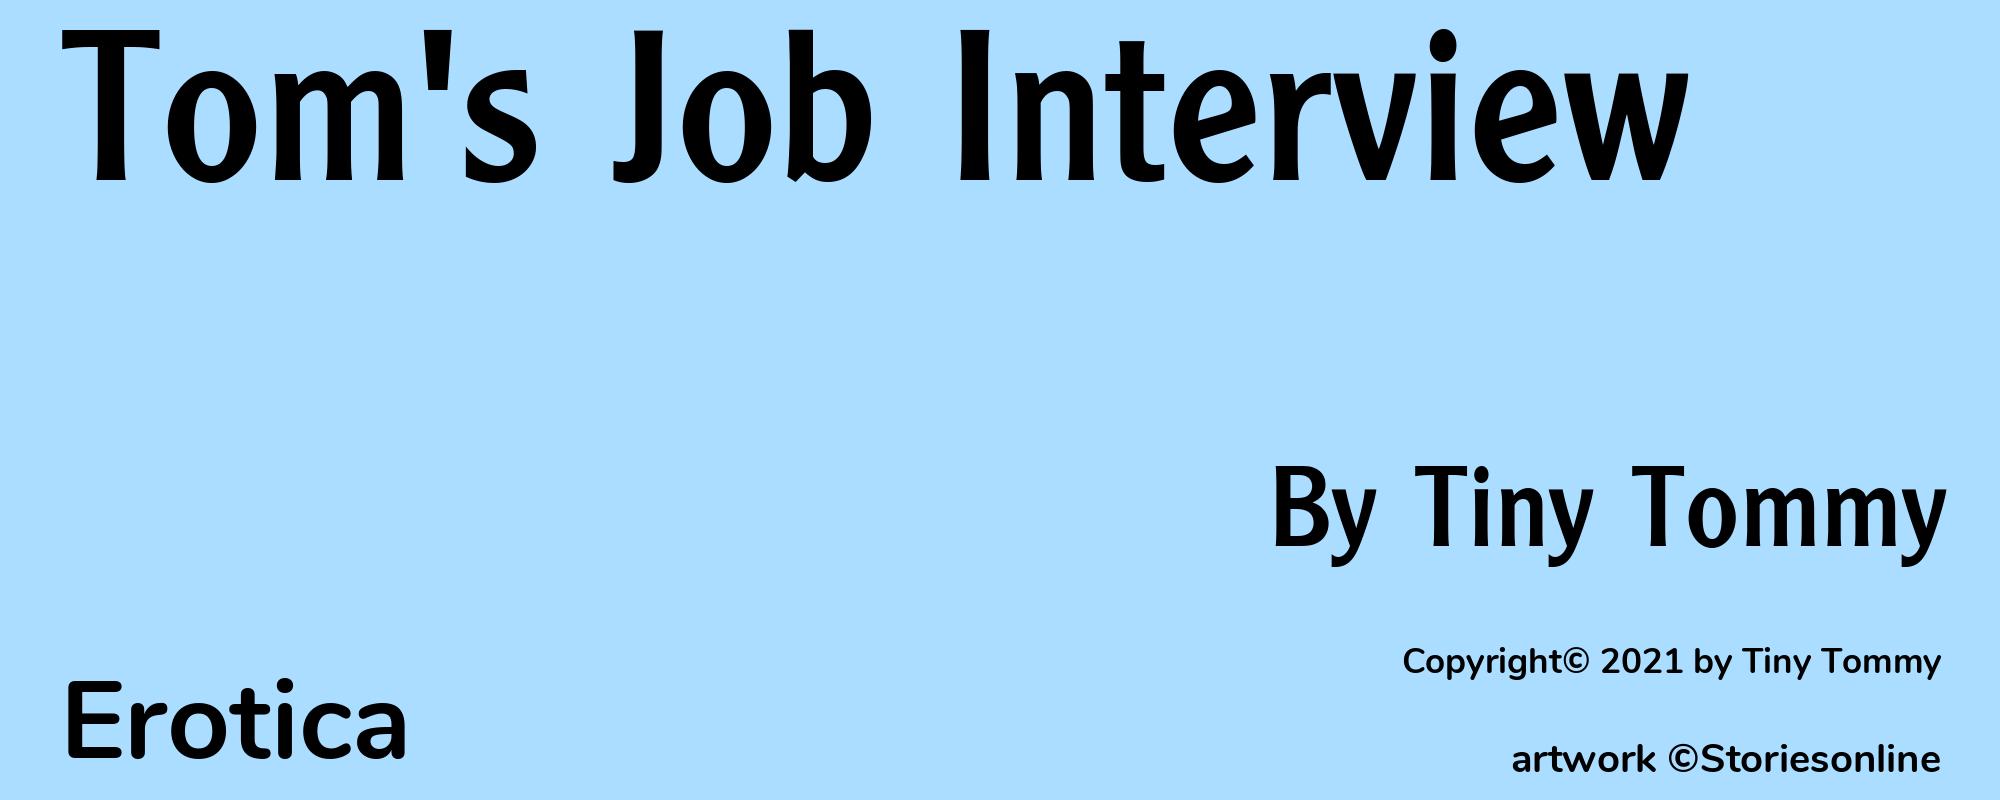 Tom's Job Interview - Cover